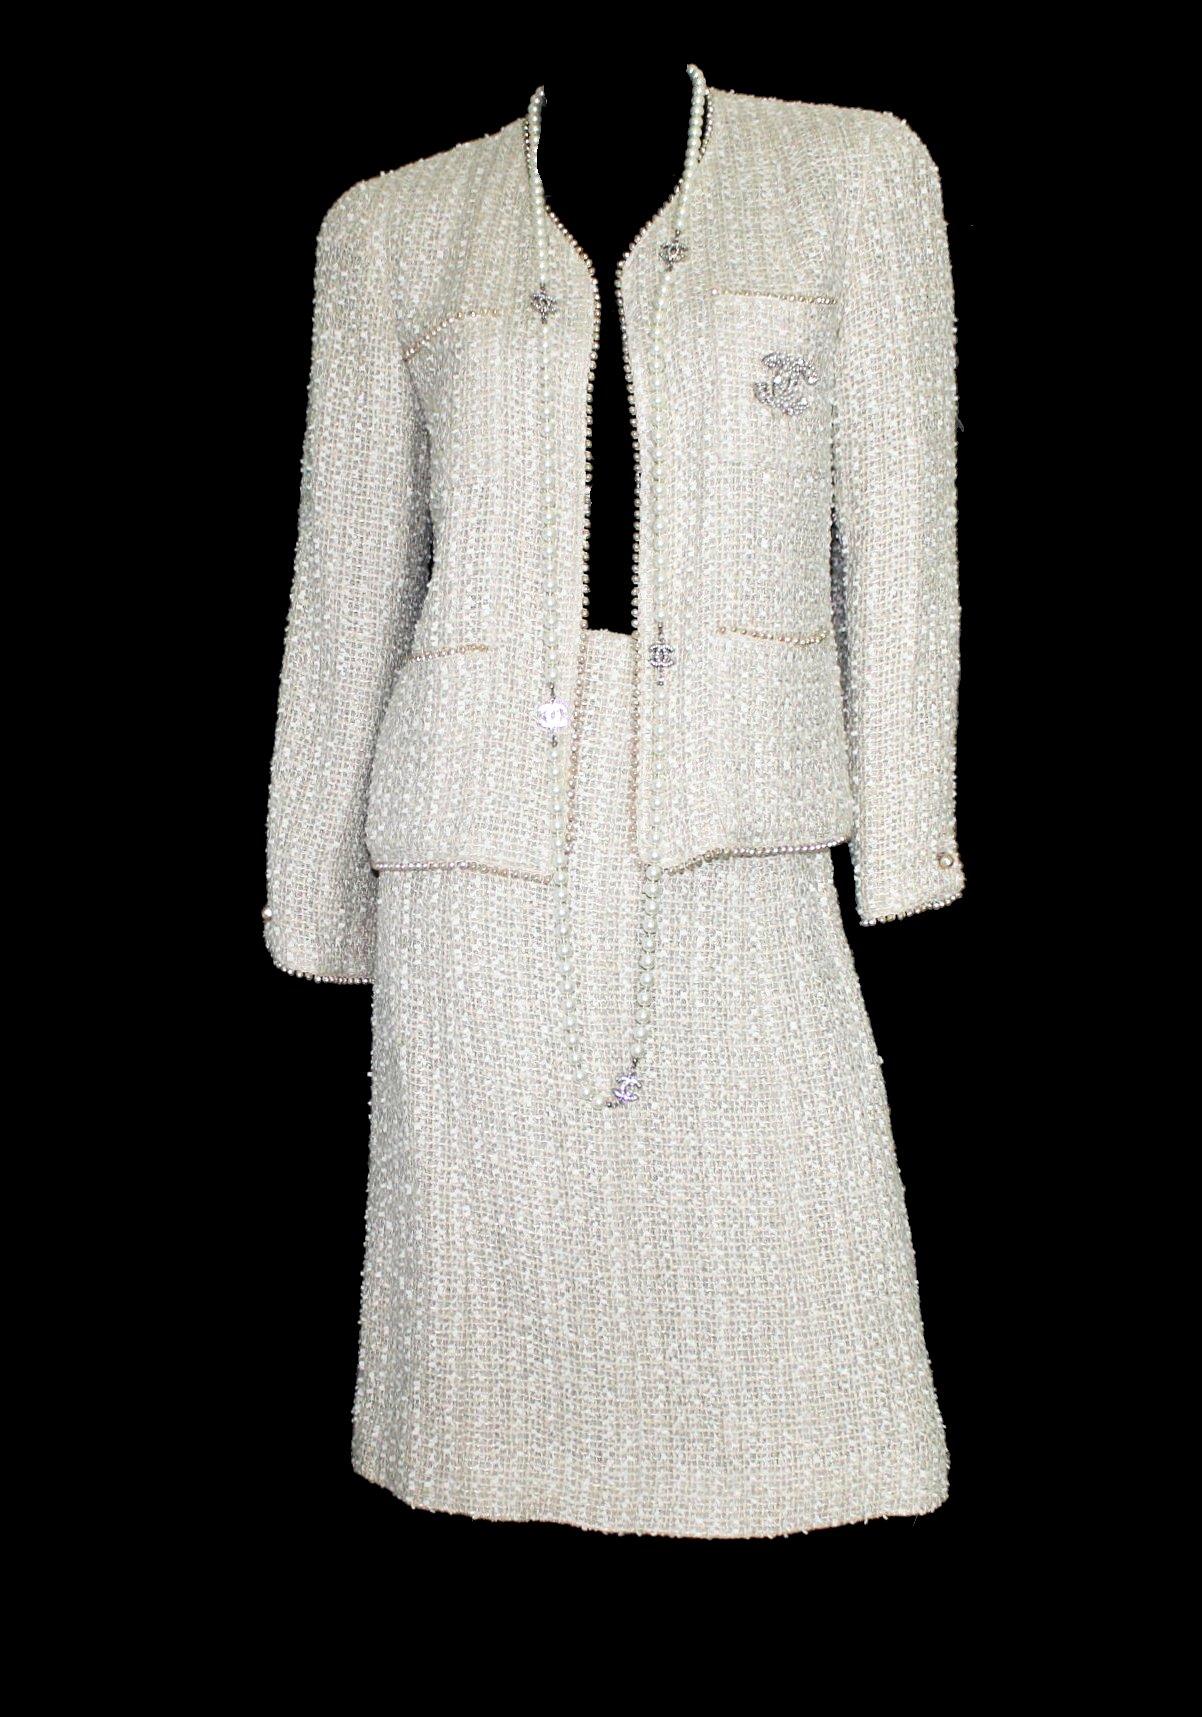 Women's Amazing Chanel Ivory Fantasy Tweed Skirt Suit with Pearl Trimming Details